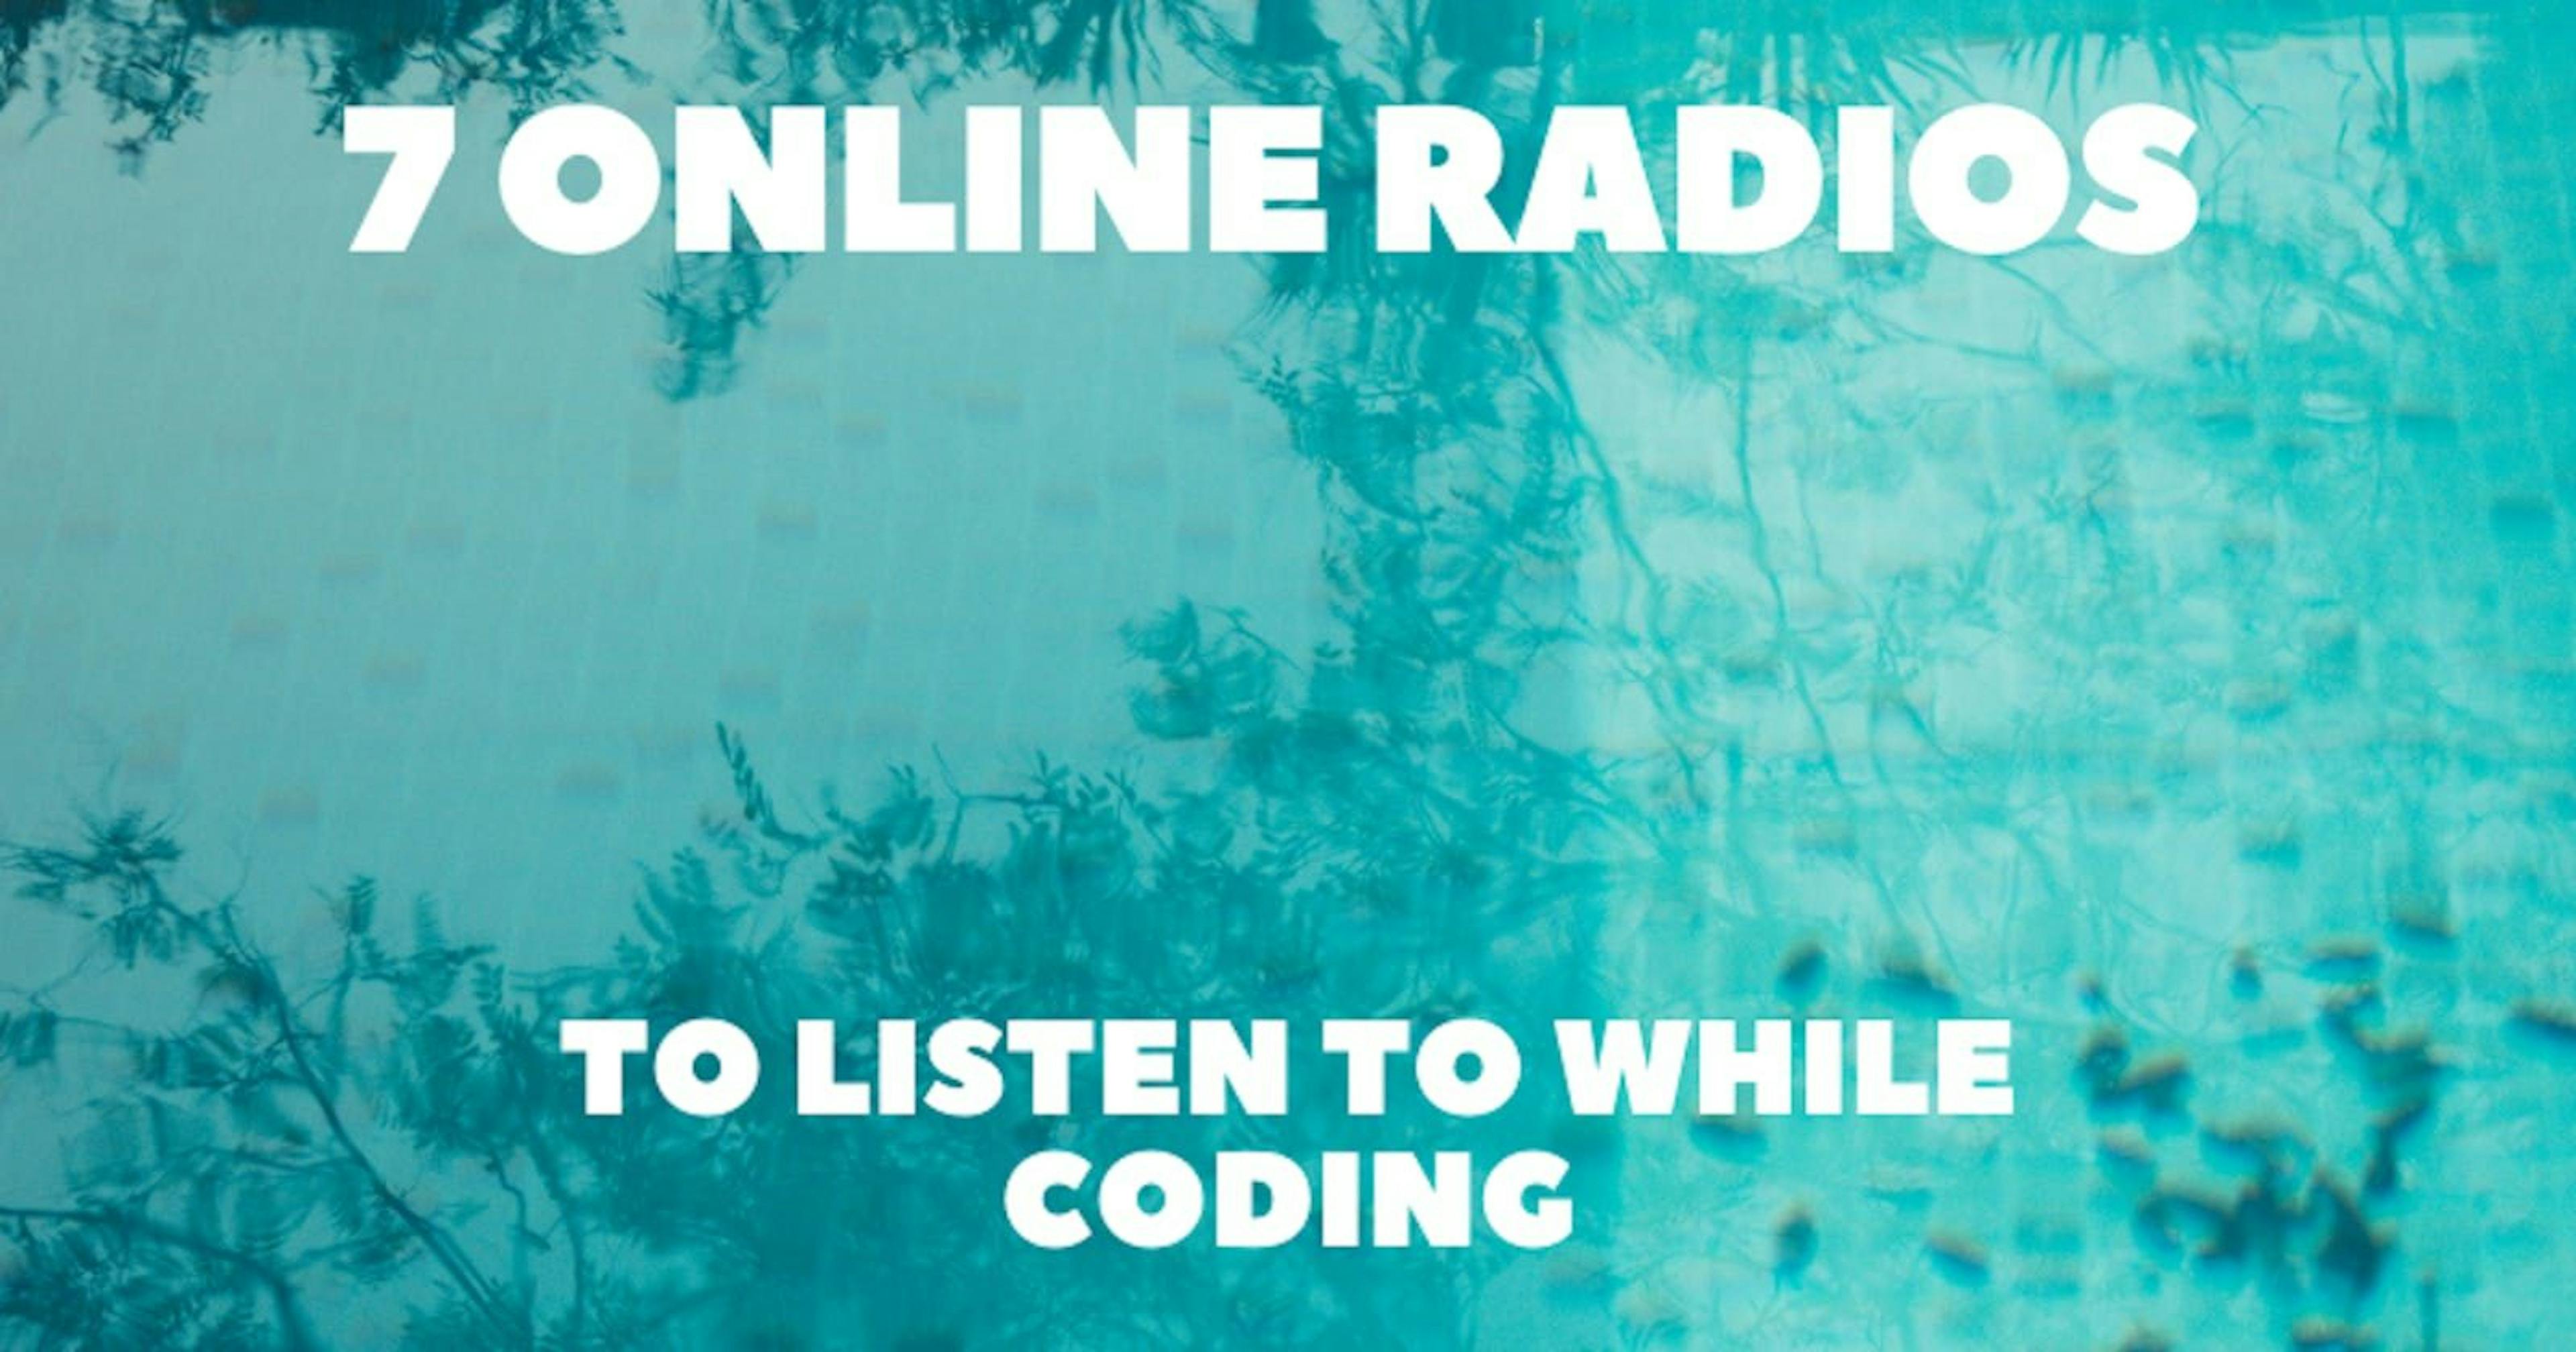 /7-online-radio-stations-for-coders feature image